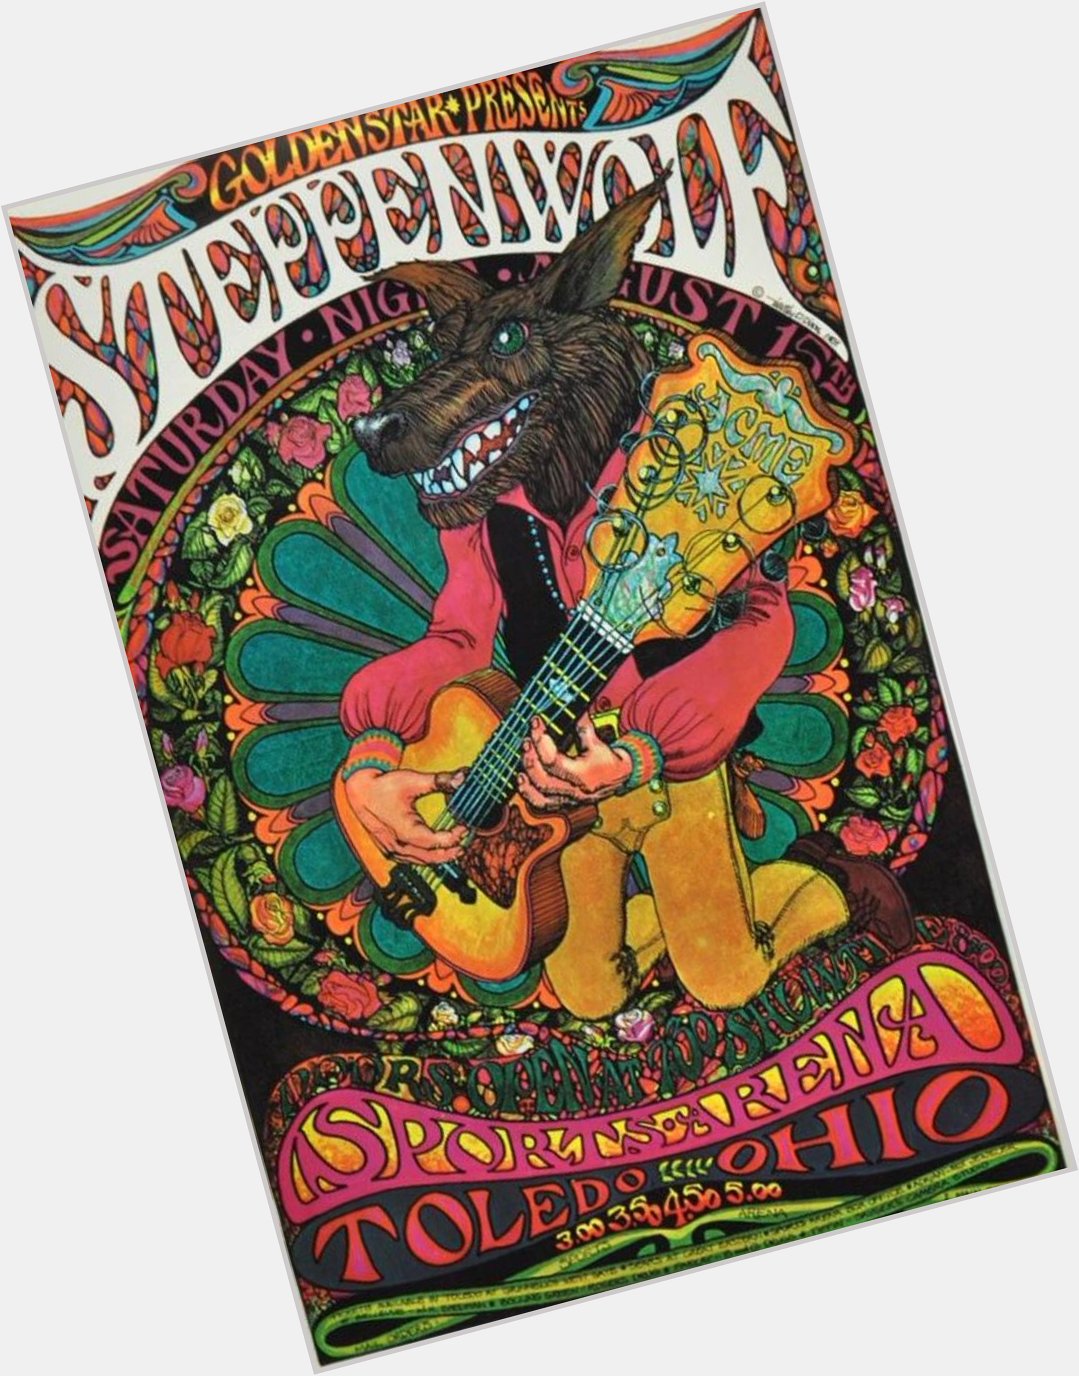 Born to be wild. Happy birthday to John Kay of Steppenwolf!
(1969 poster by Timothy Dixon) 